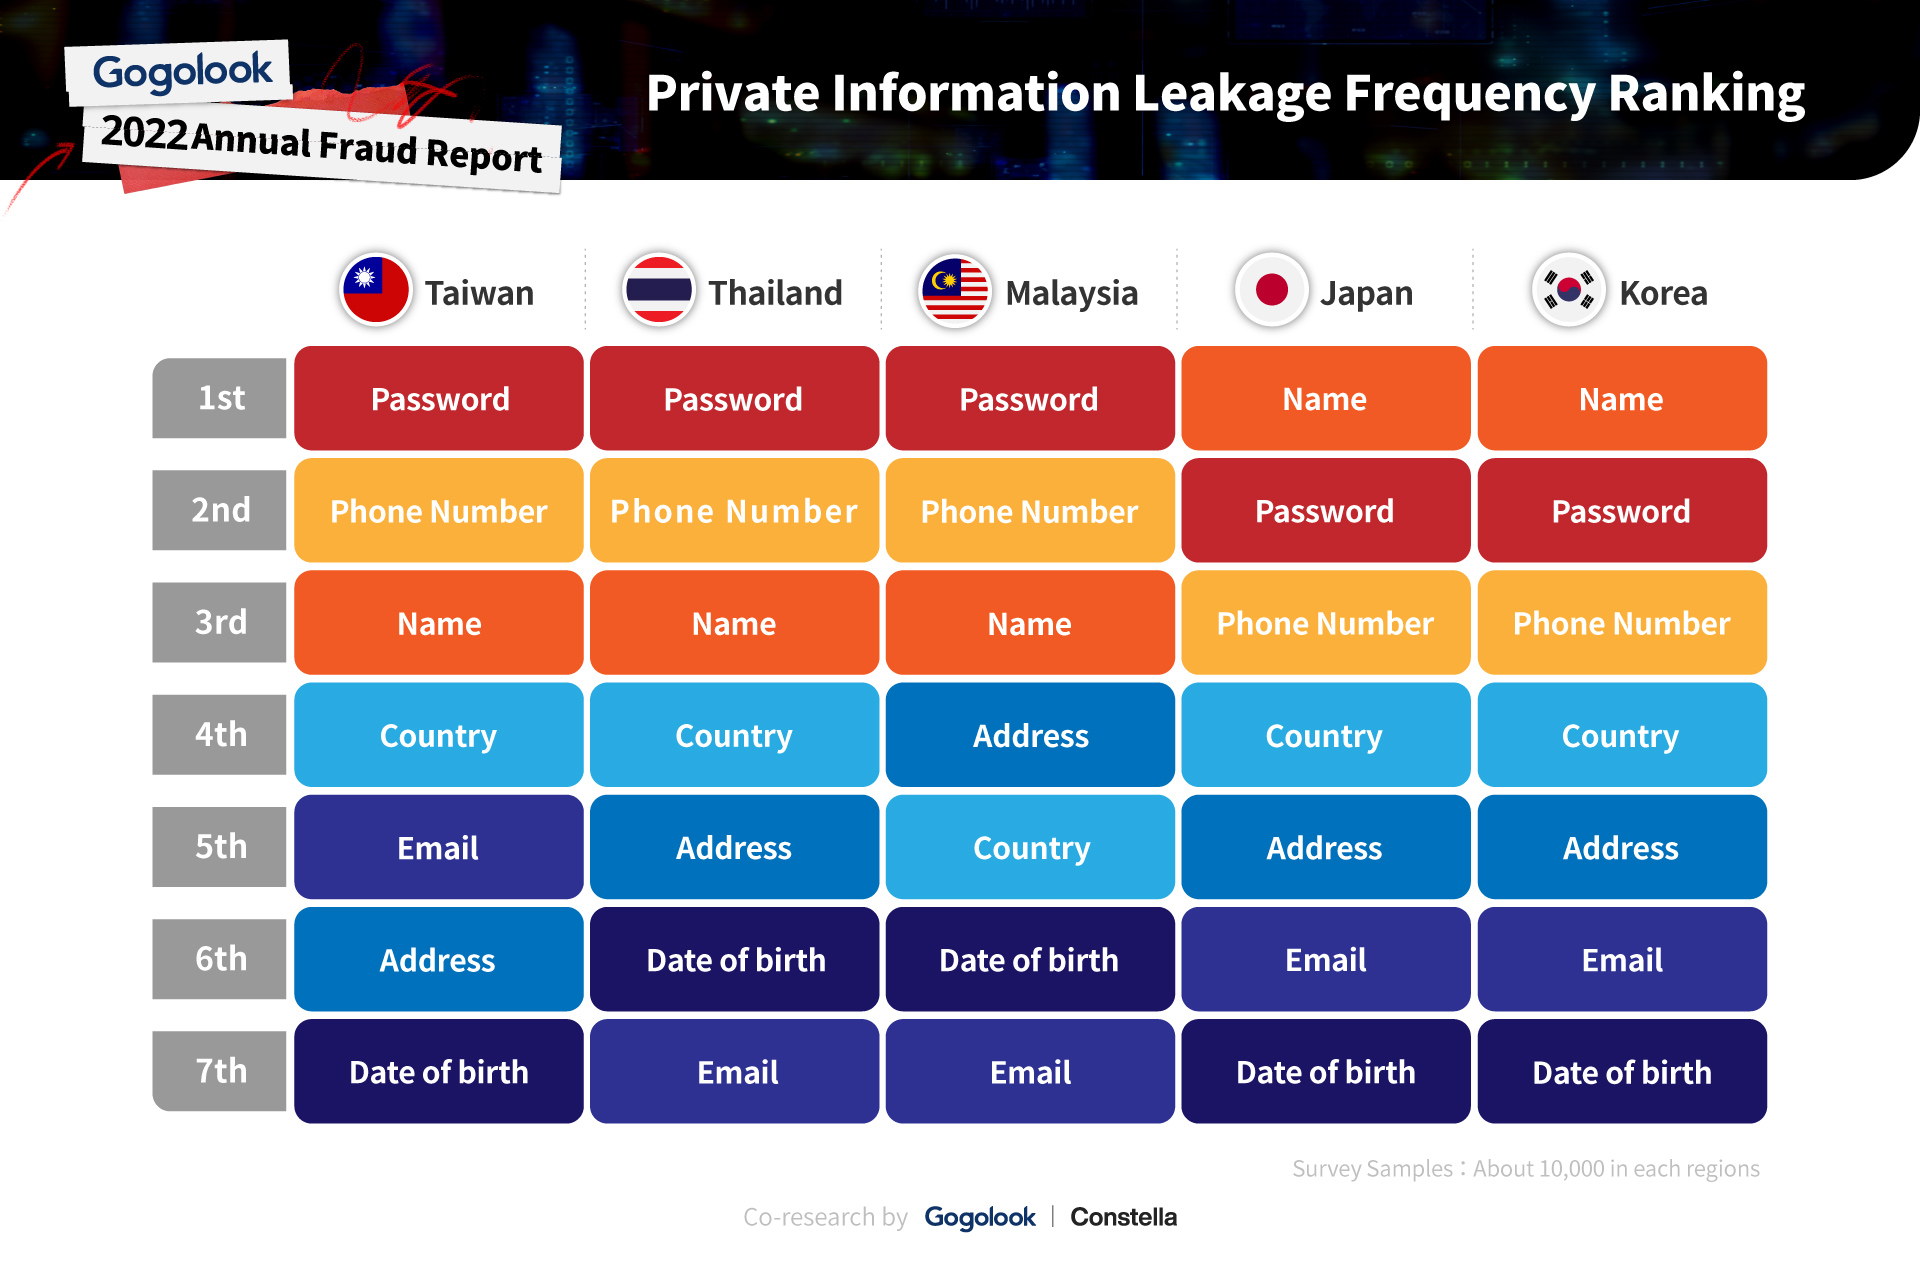 Photo 2_Private Information Leakage Frequency Ranking.jpg